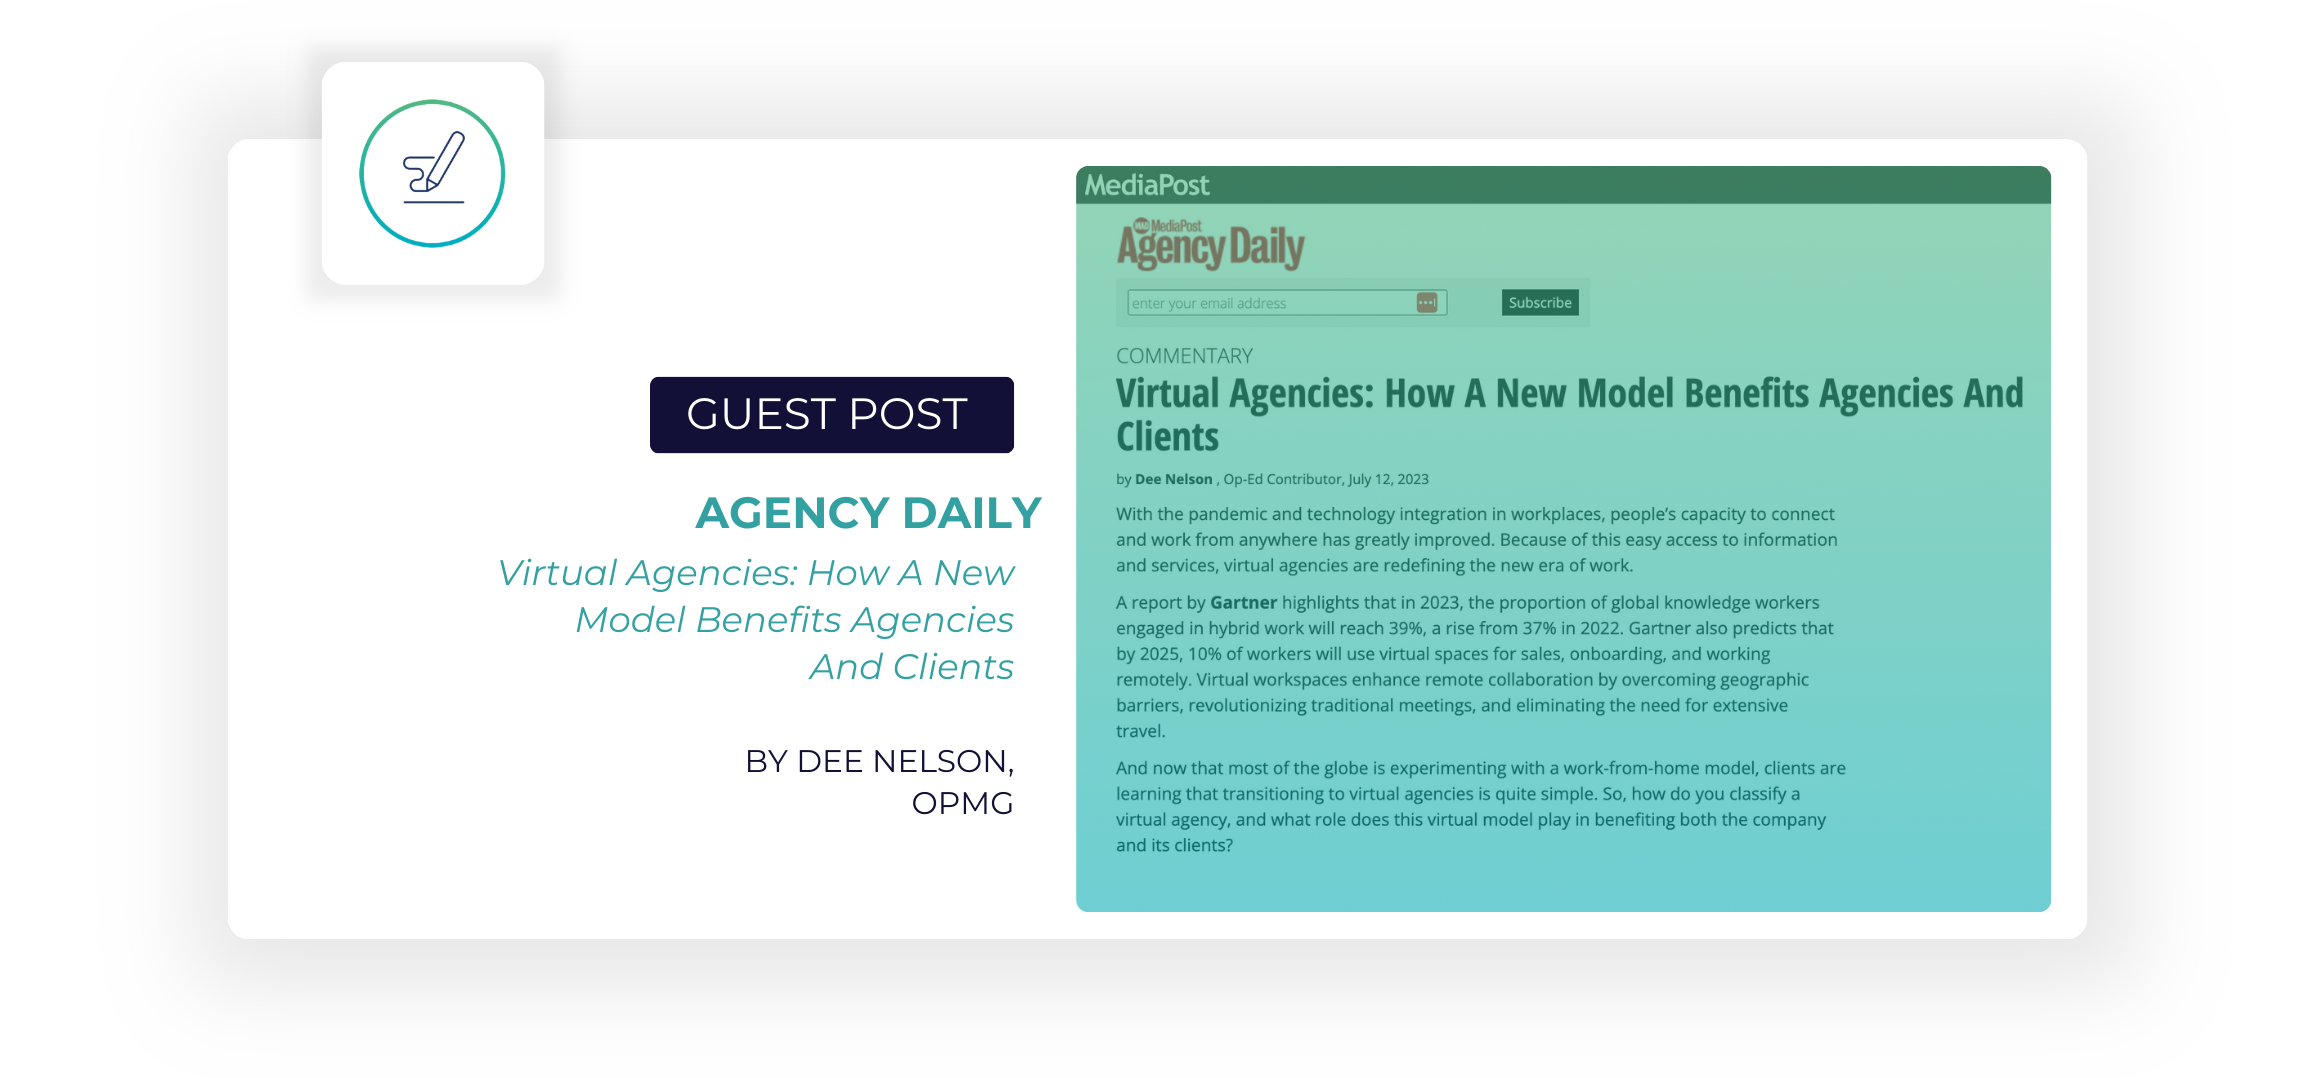 Guest post in Agency Daily by Dee Nelson of OPMG: Virtual Agencies: How a New Model Benefits Agencies And Clients